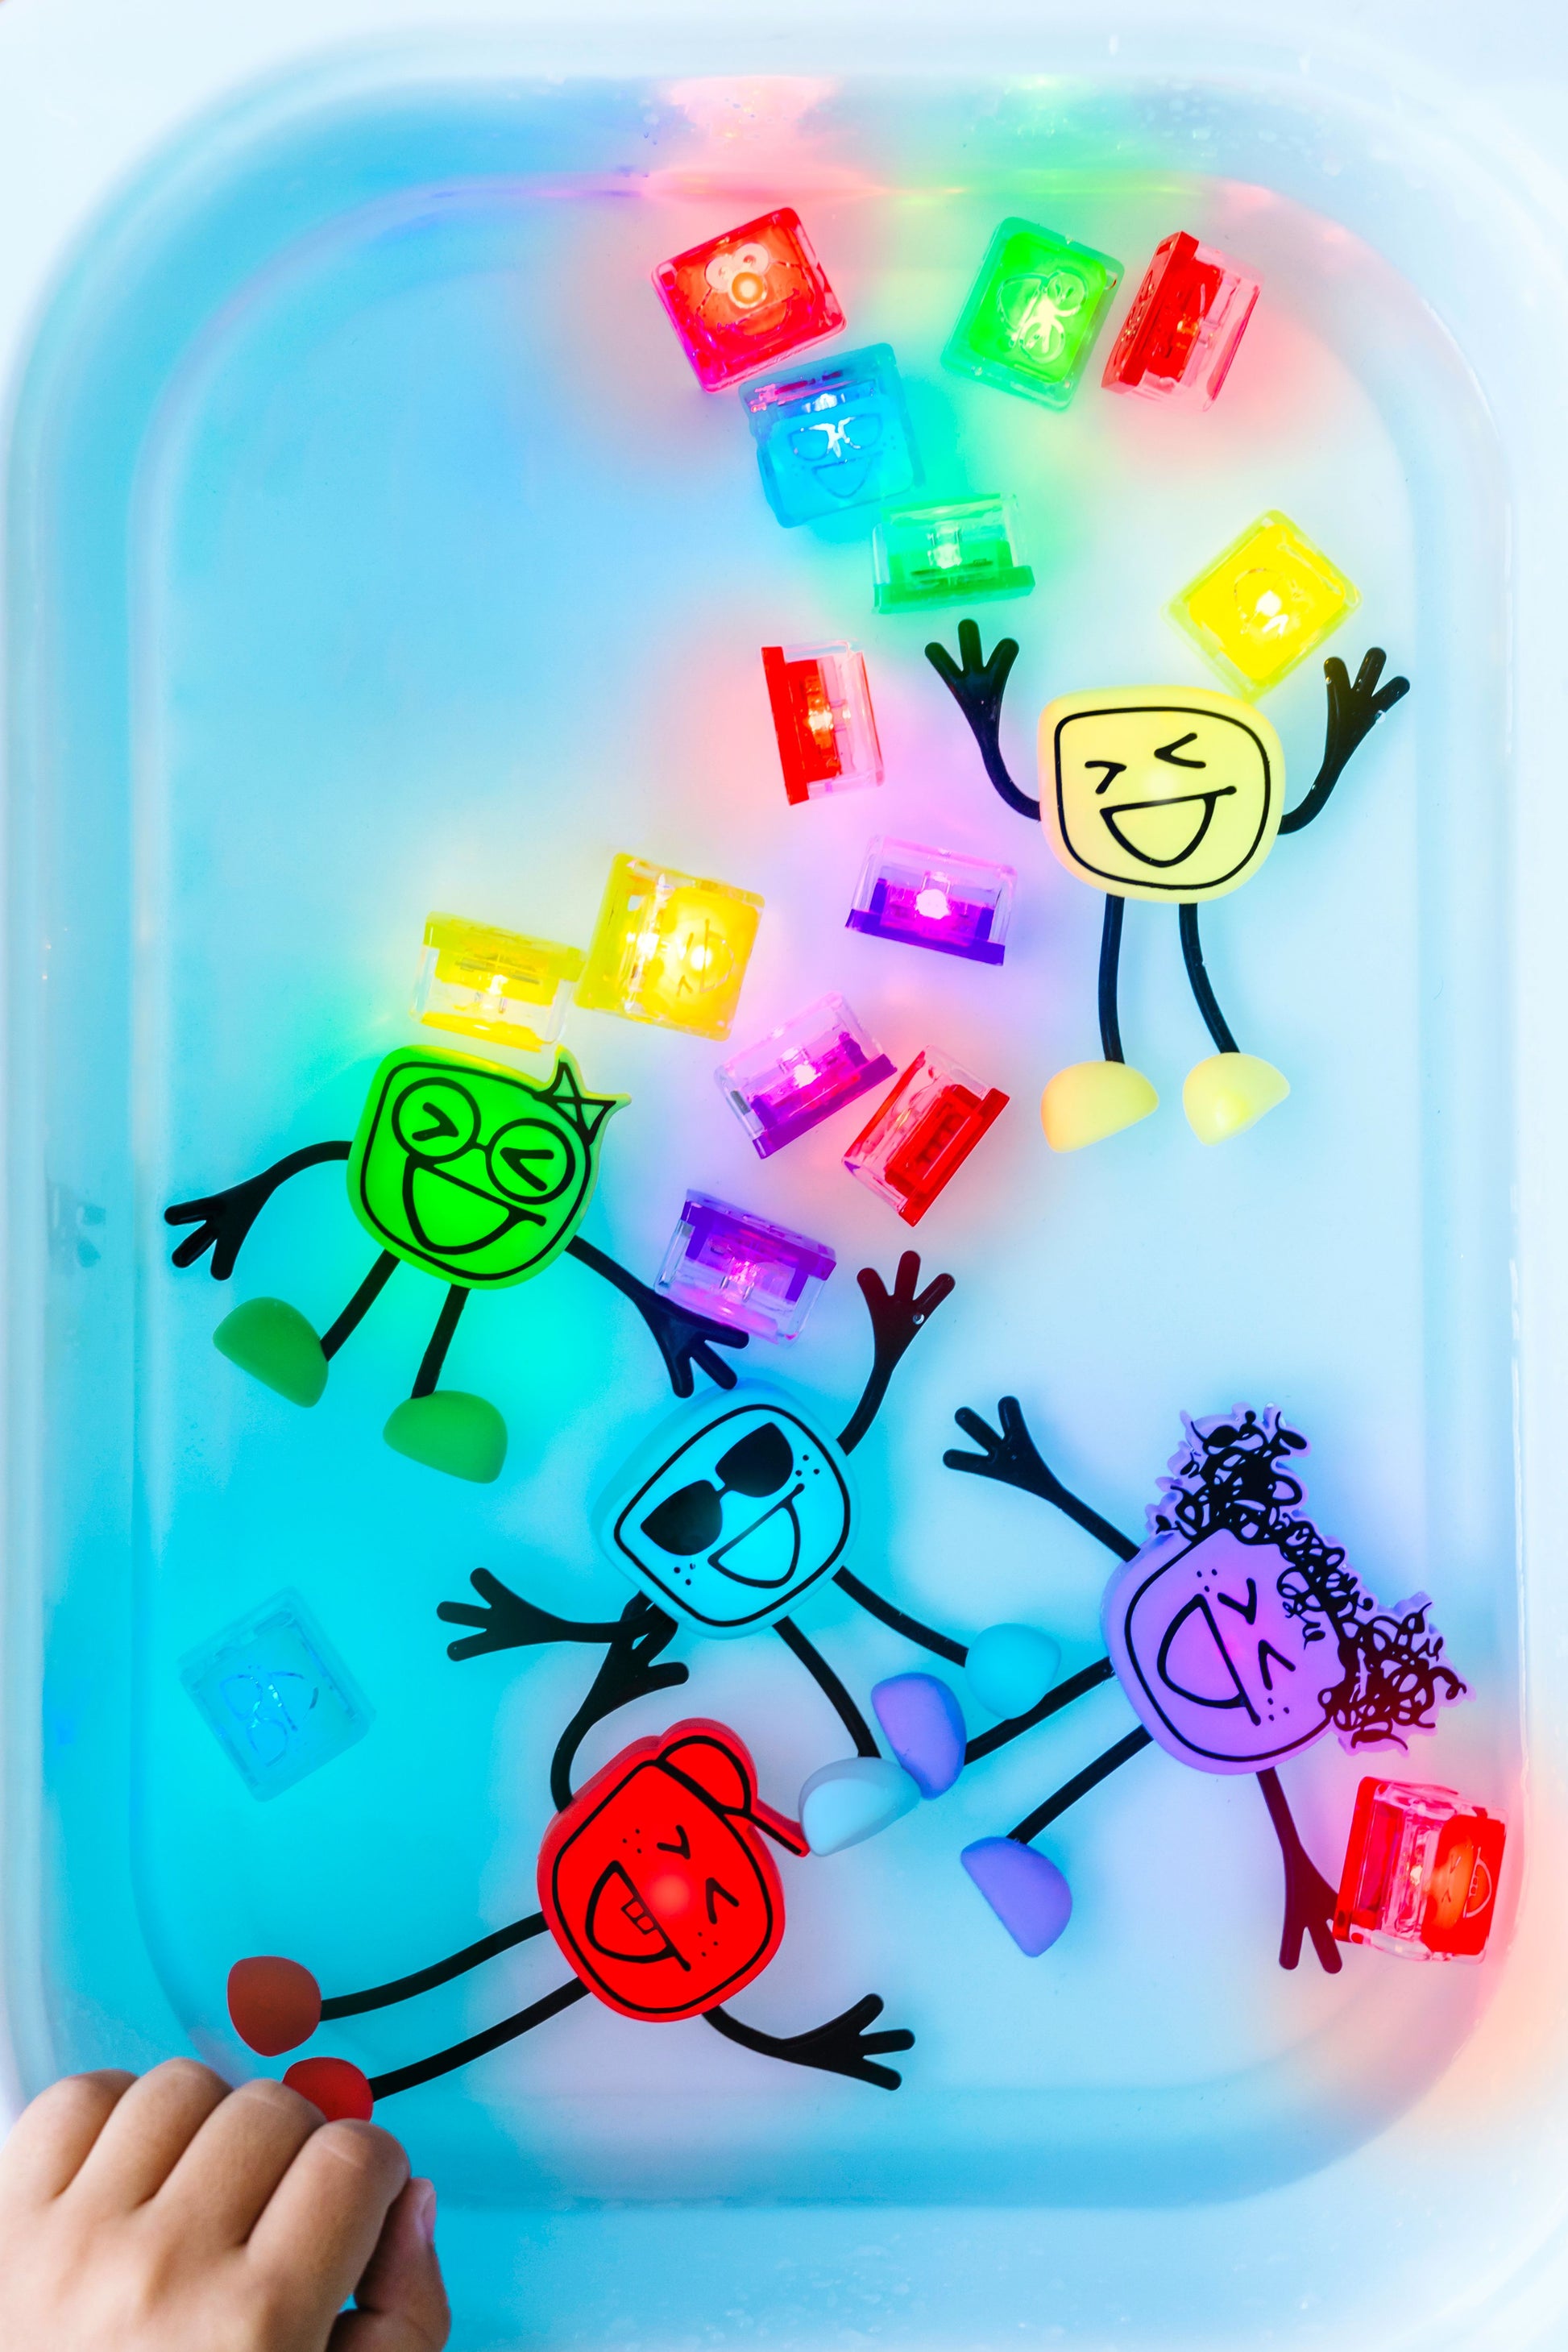 Glo_Pal_Cubes_brightly_lit_up_in_sensory_tub_with_water